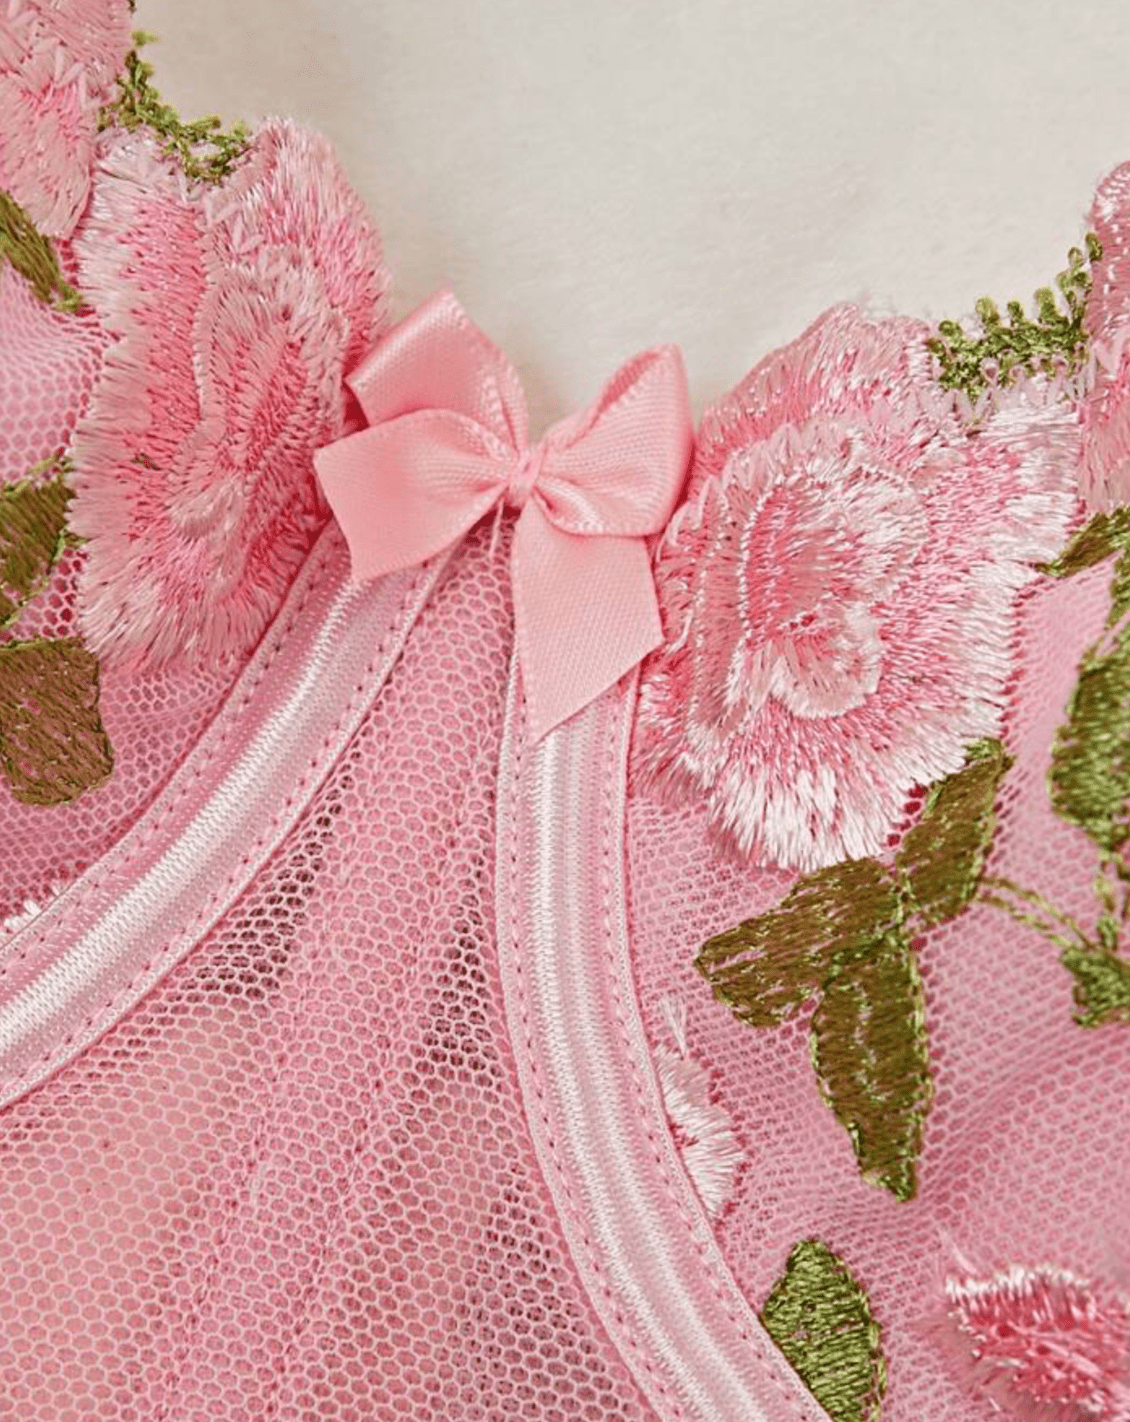 pink bow on shirt